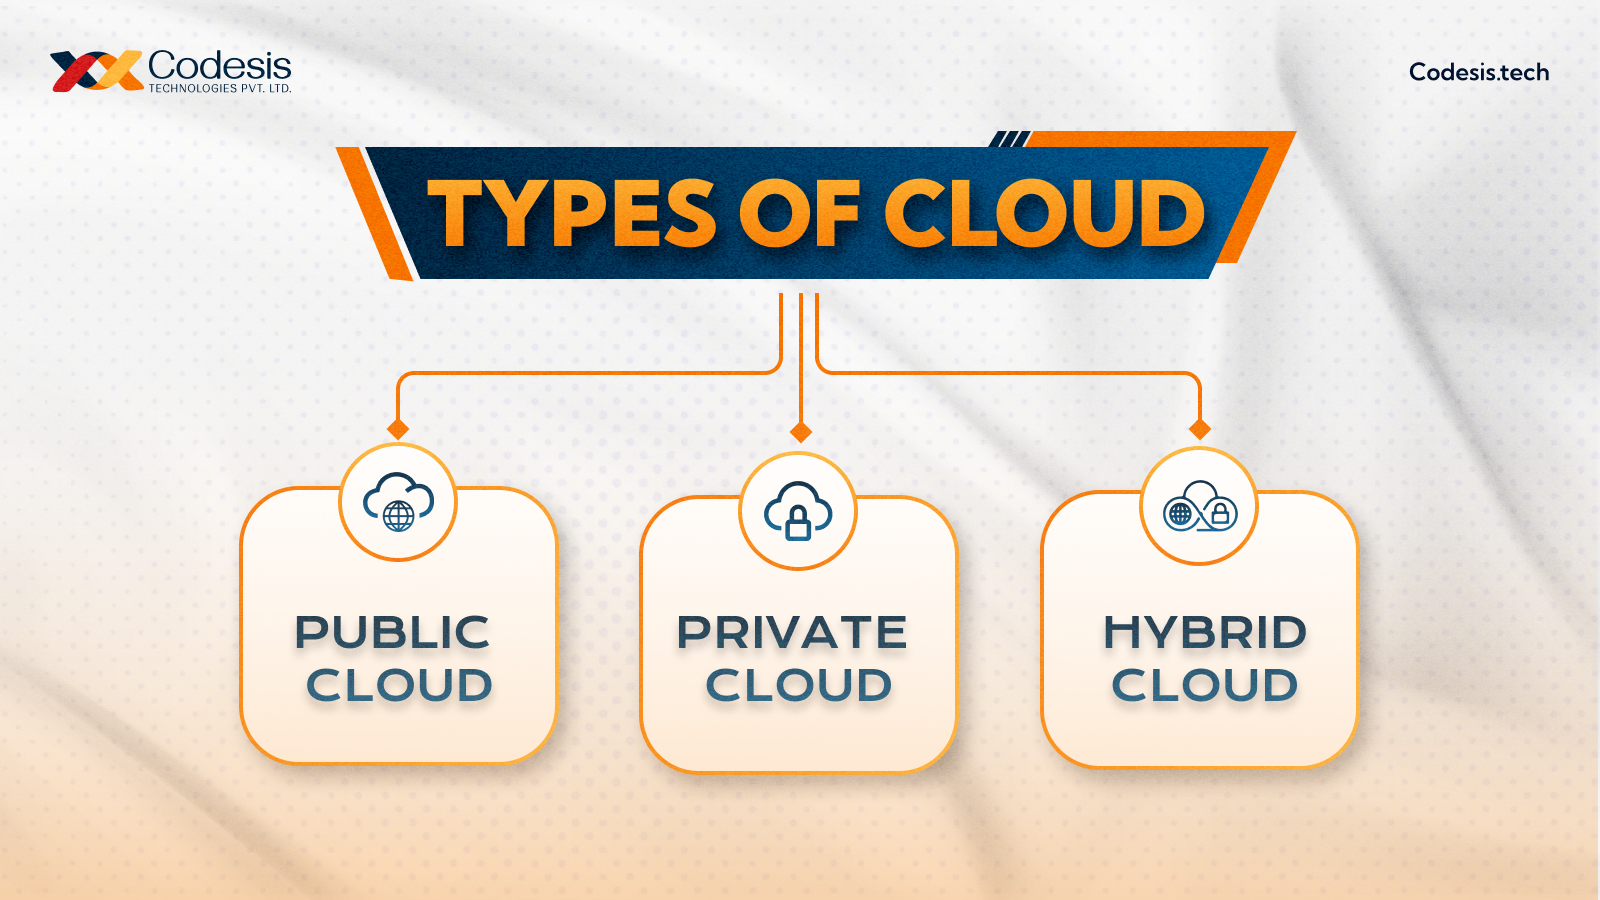 an image representing types of cloud which is Public cloud, private cloud, Hybrid cloud